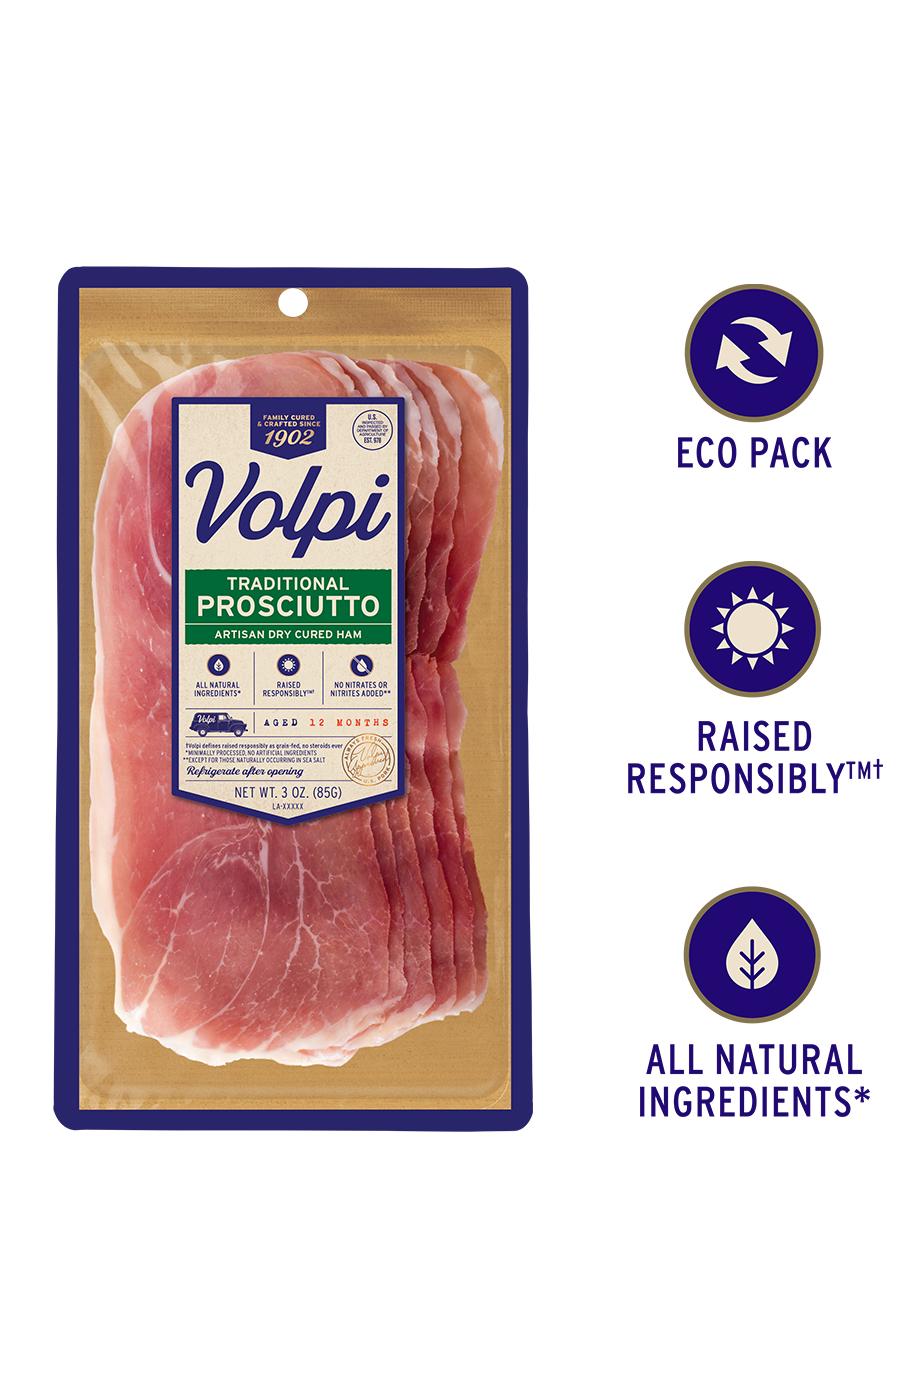 Volpi Sliced Traditional Prosciutto; image 3 of 4